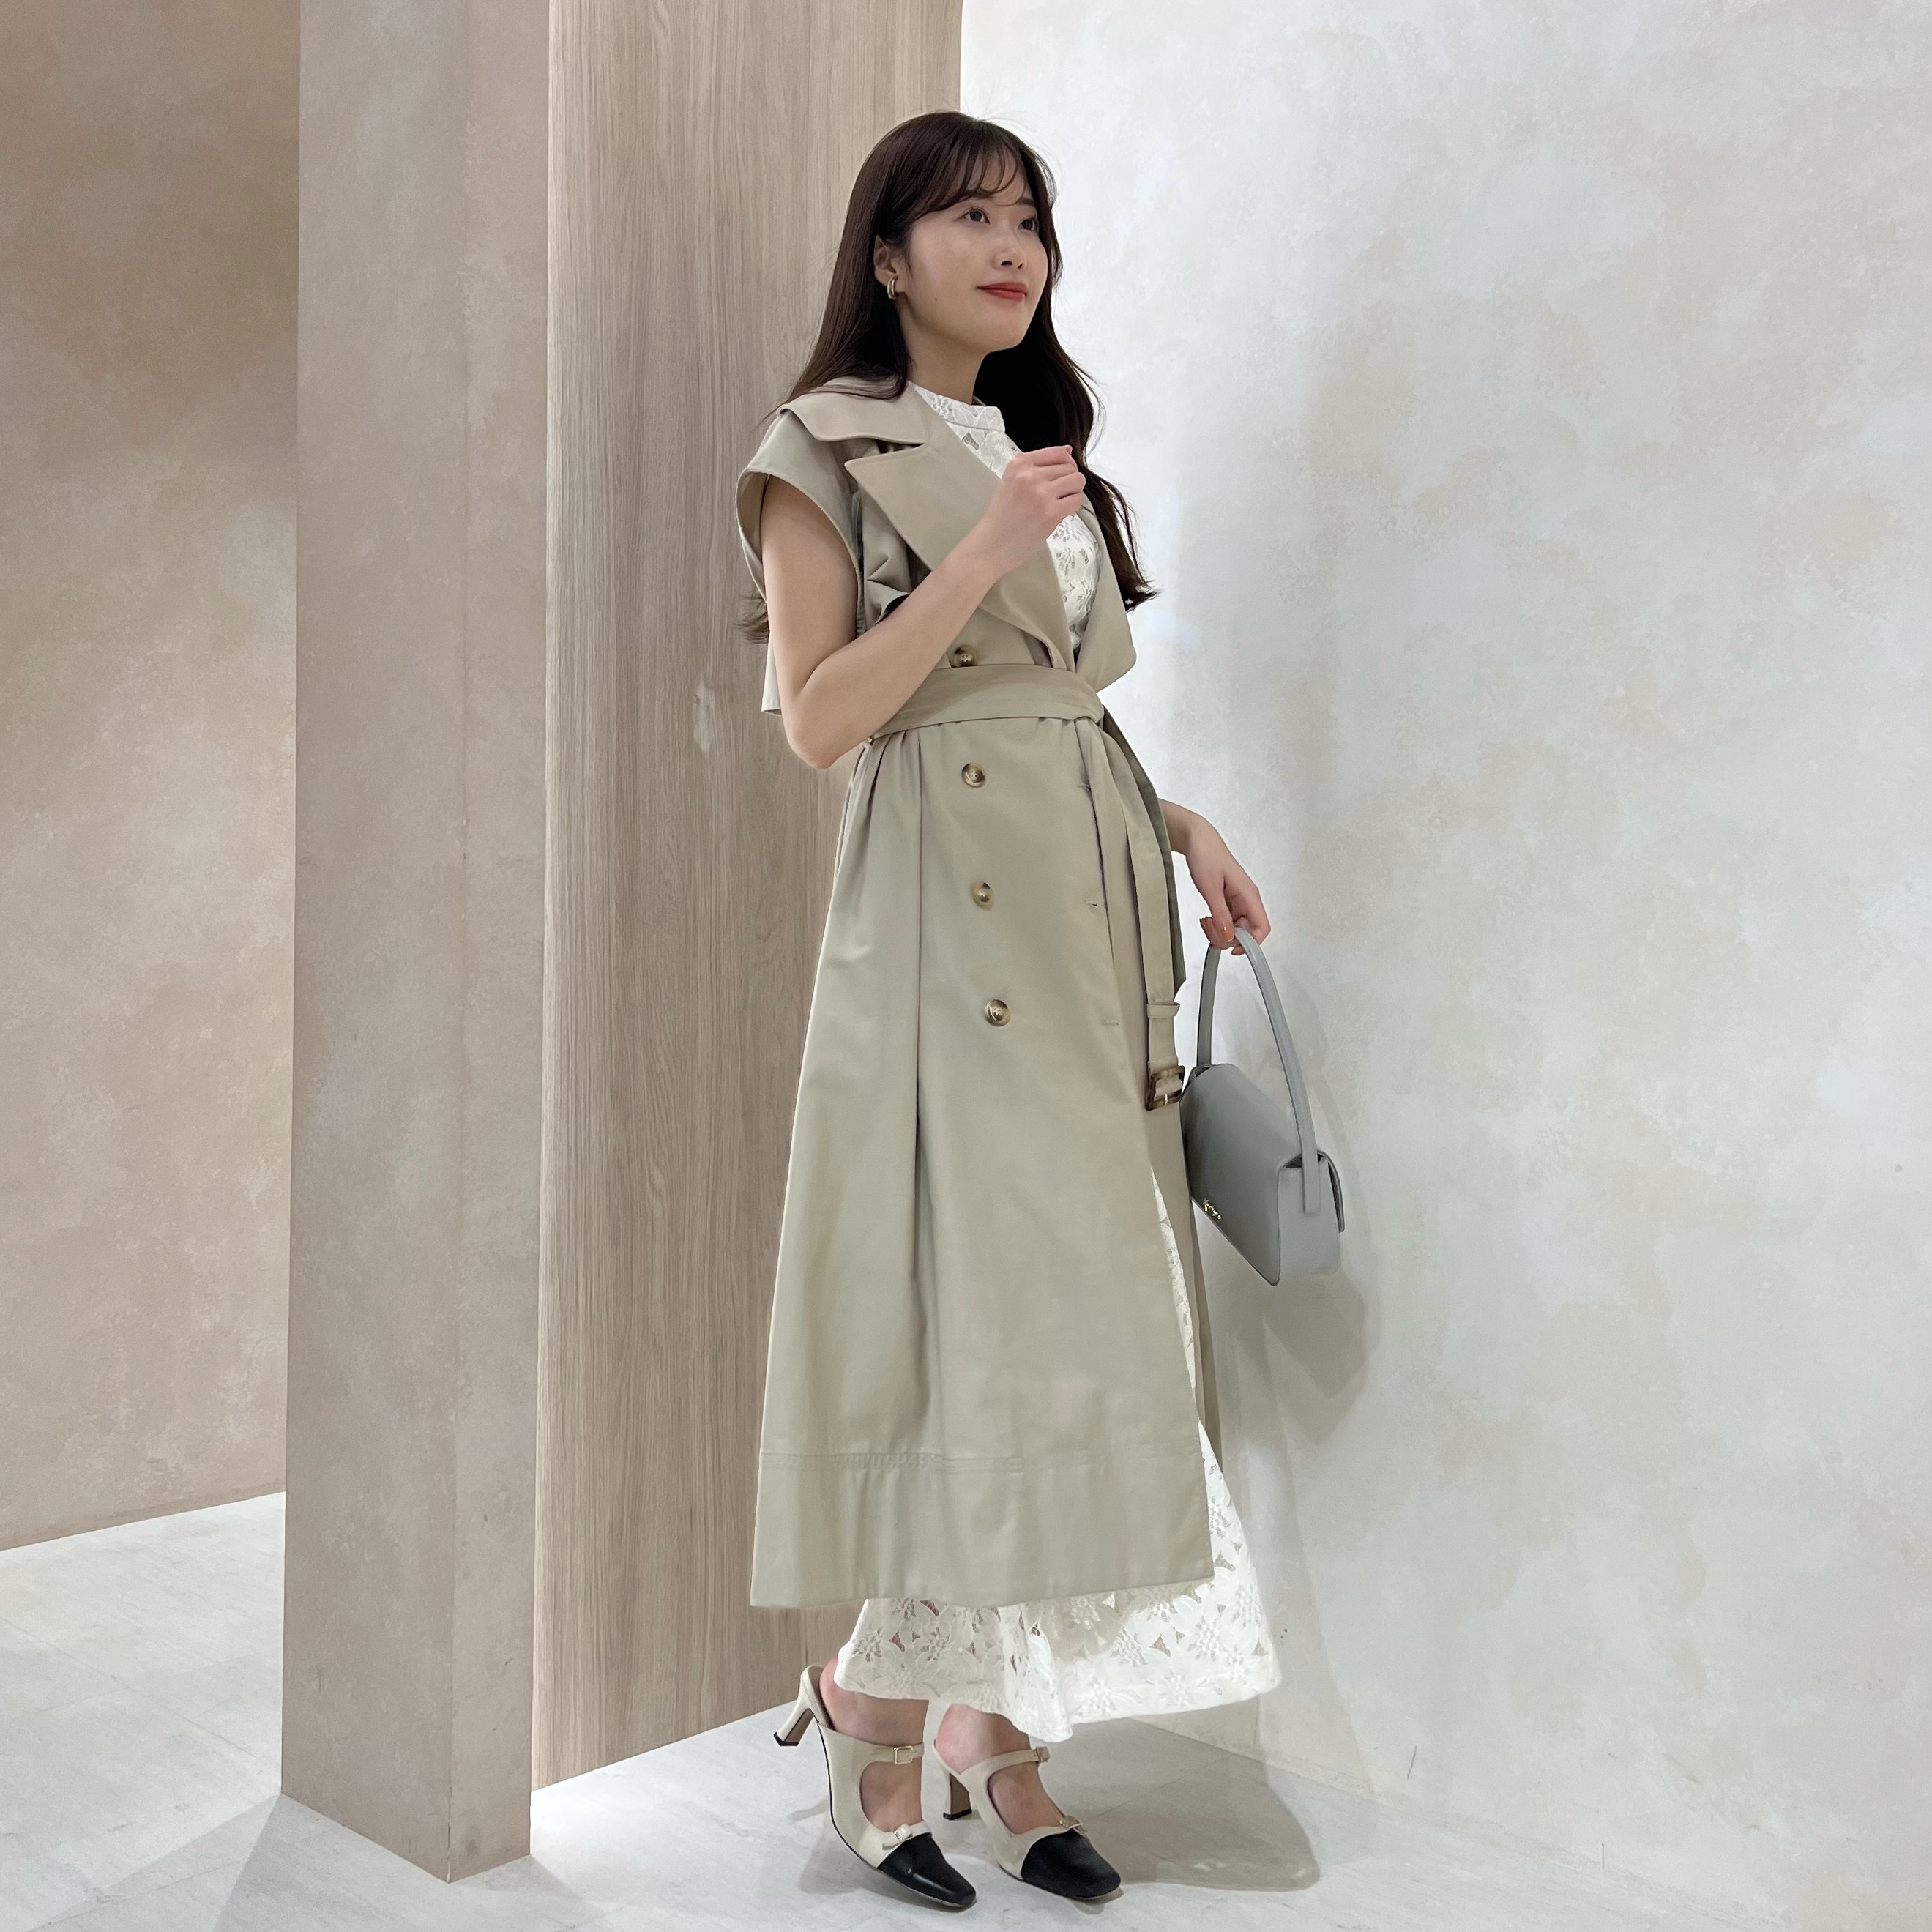 Her lip to on X: "🏷Sleeveless Twill Trench Dress   taupe